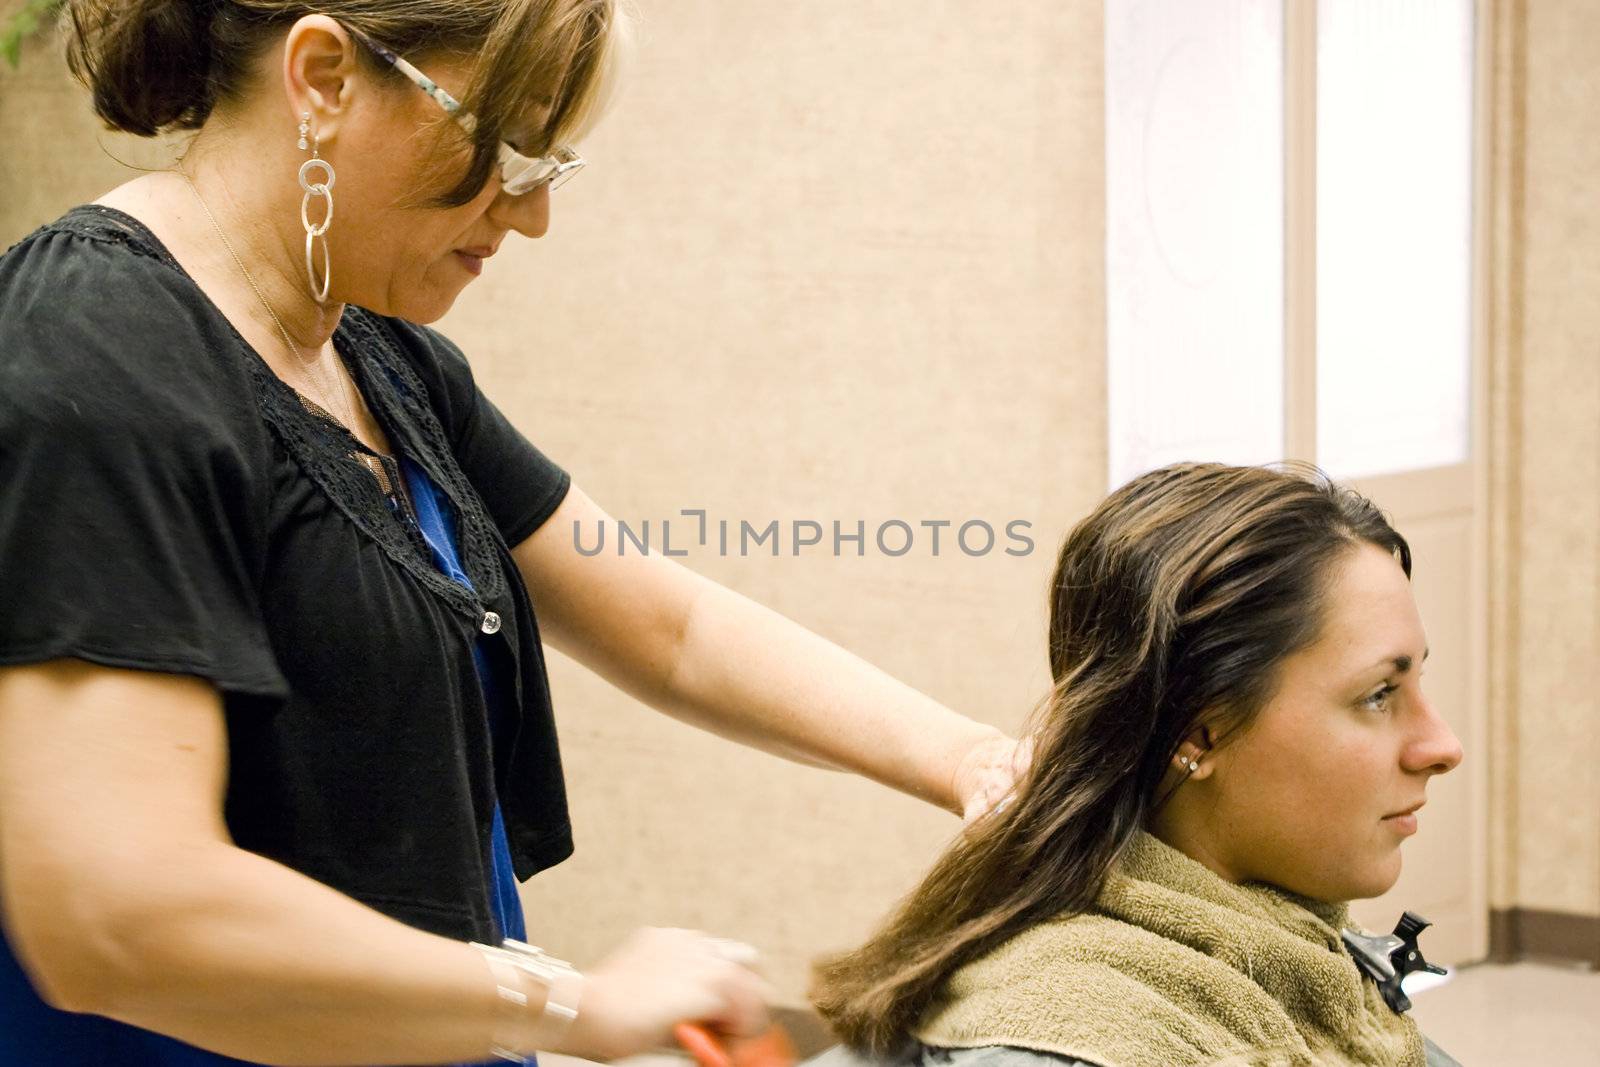 A hairdresser working on a clients hair at the salon.